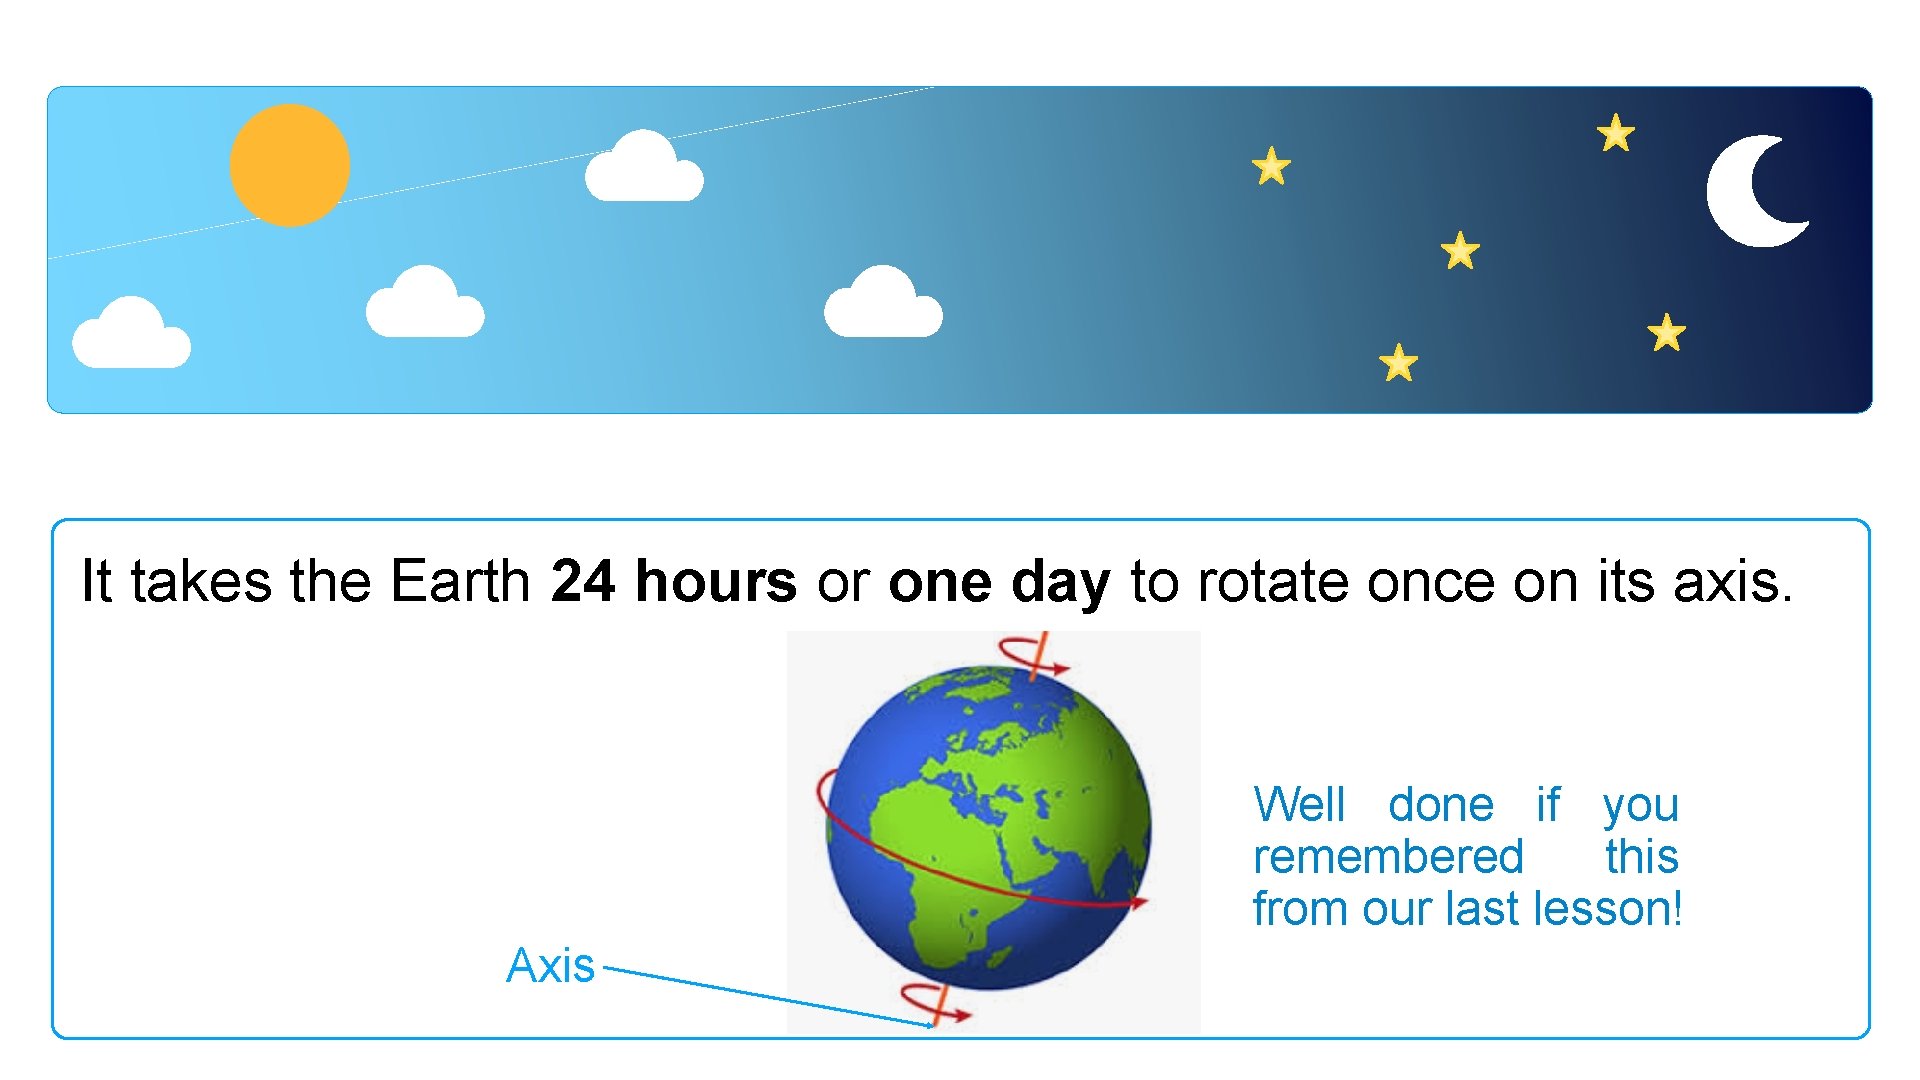 It takes the Earth 24 hours or one day to rotate once on its